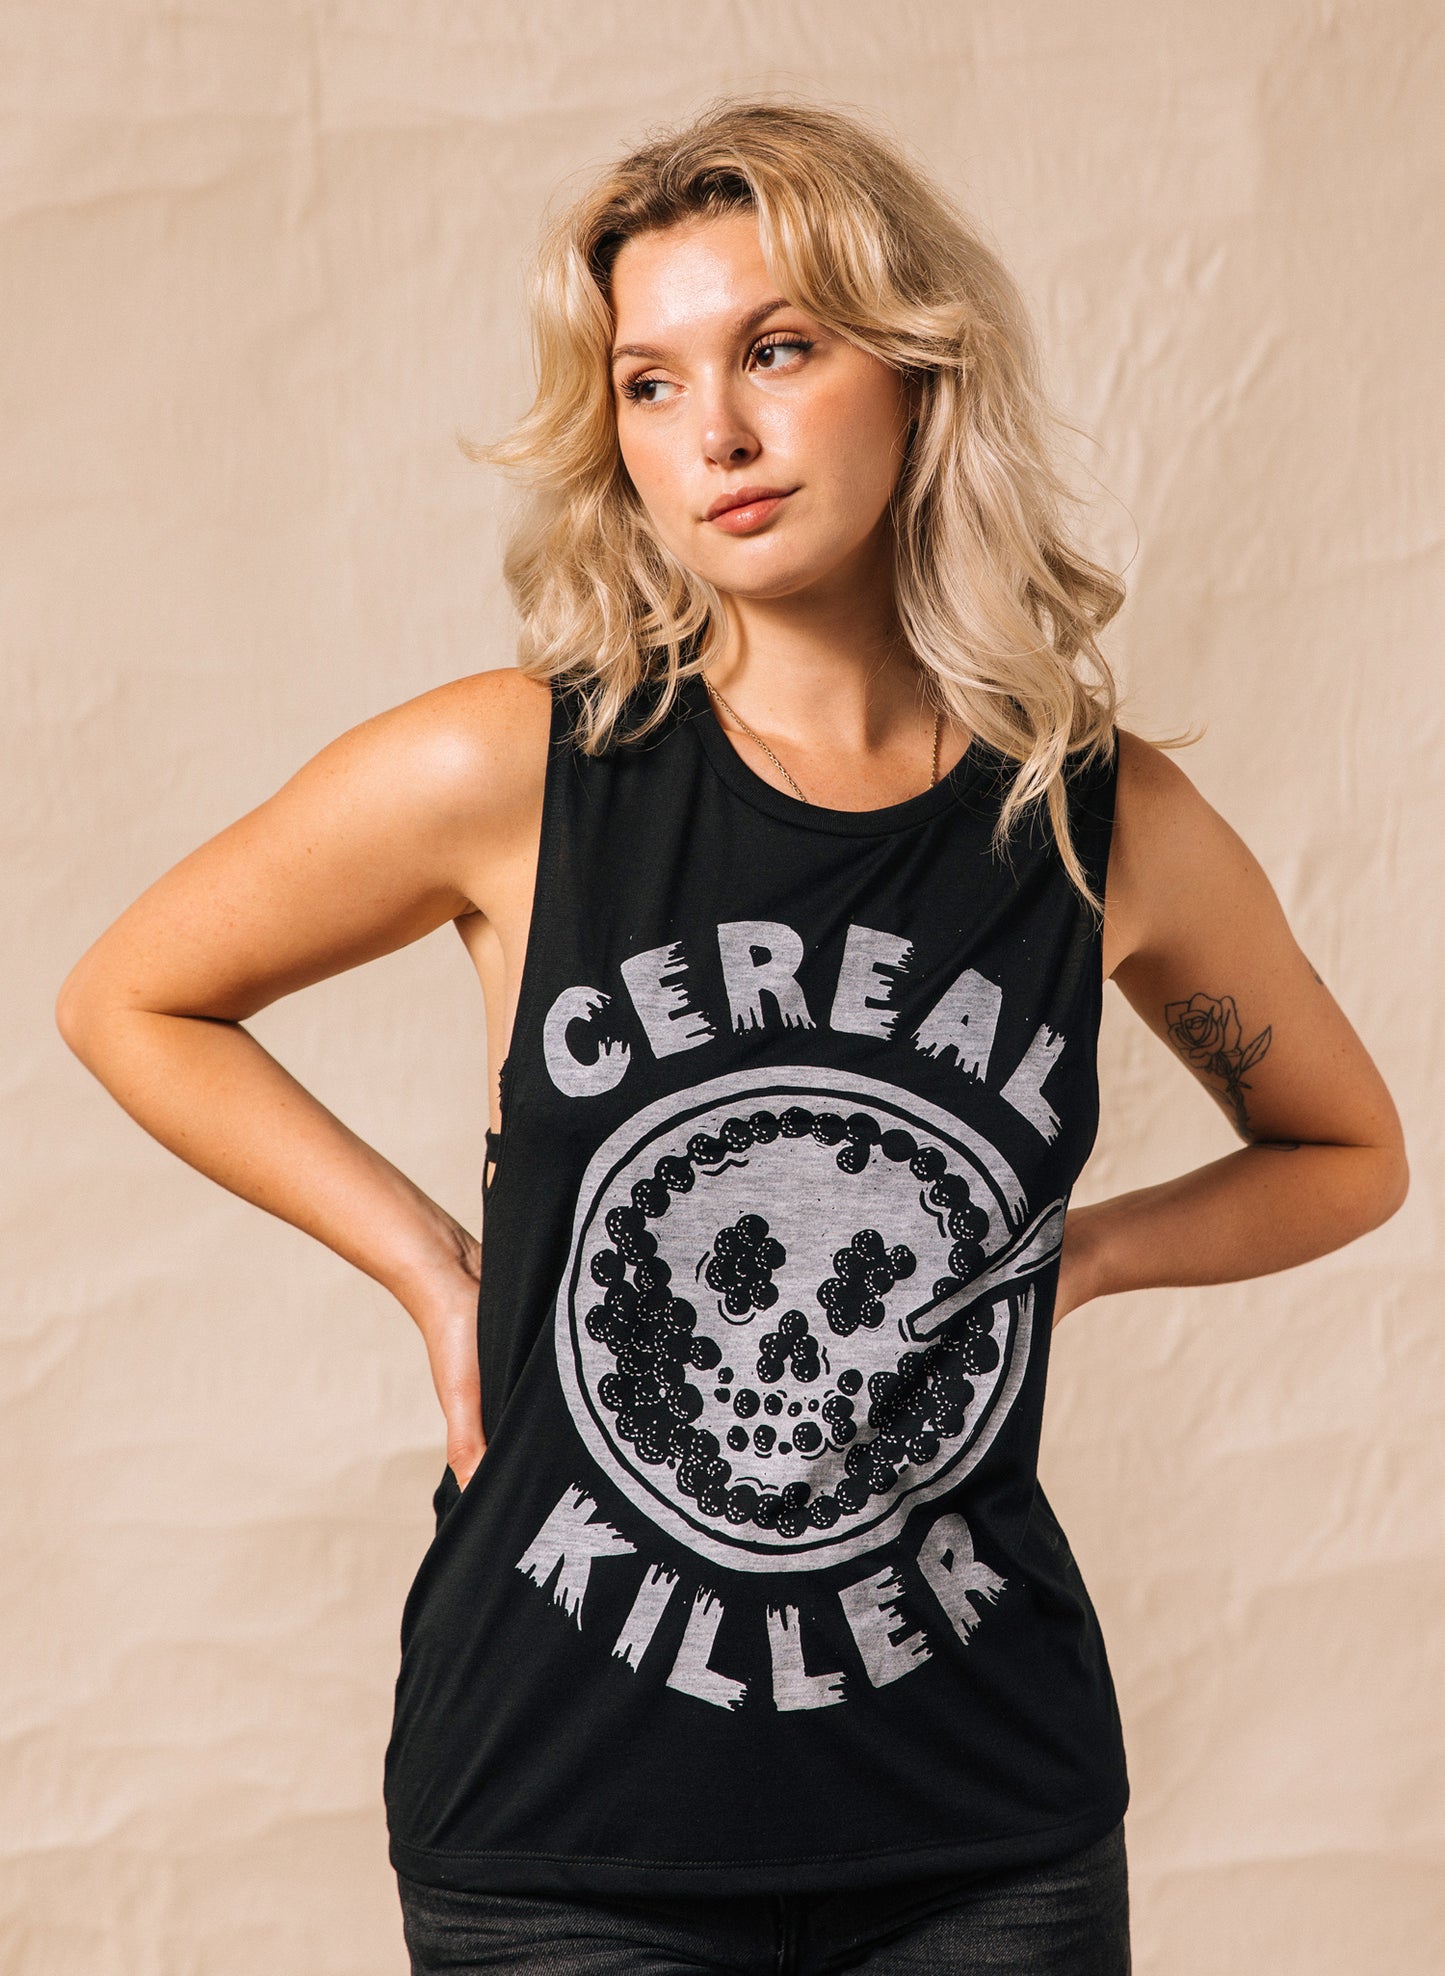 Cereal Killer Muscle Tee